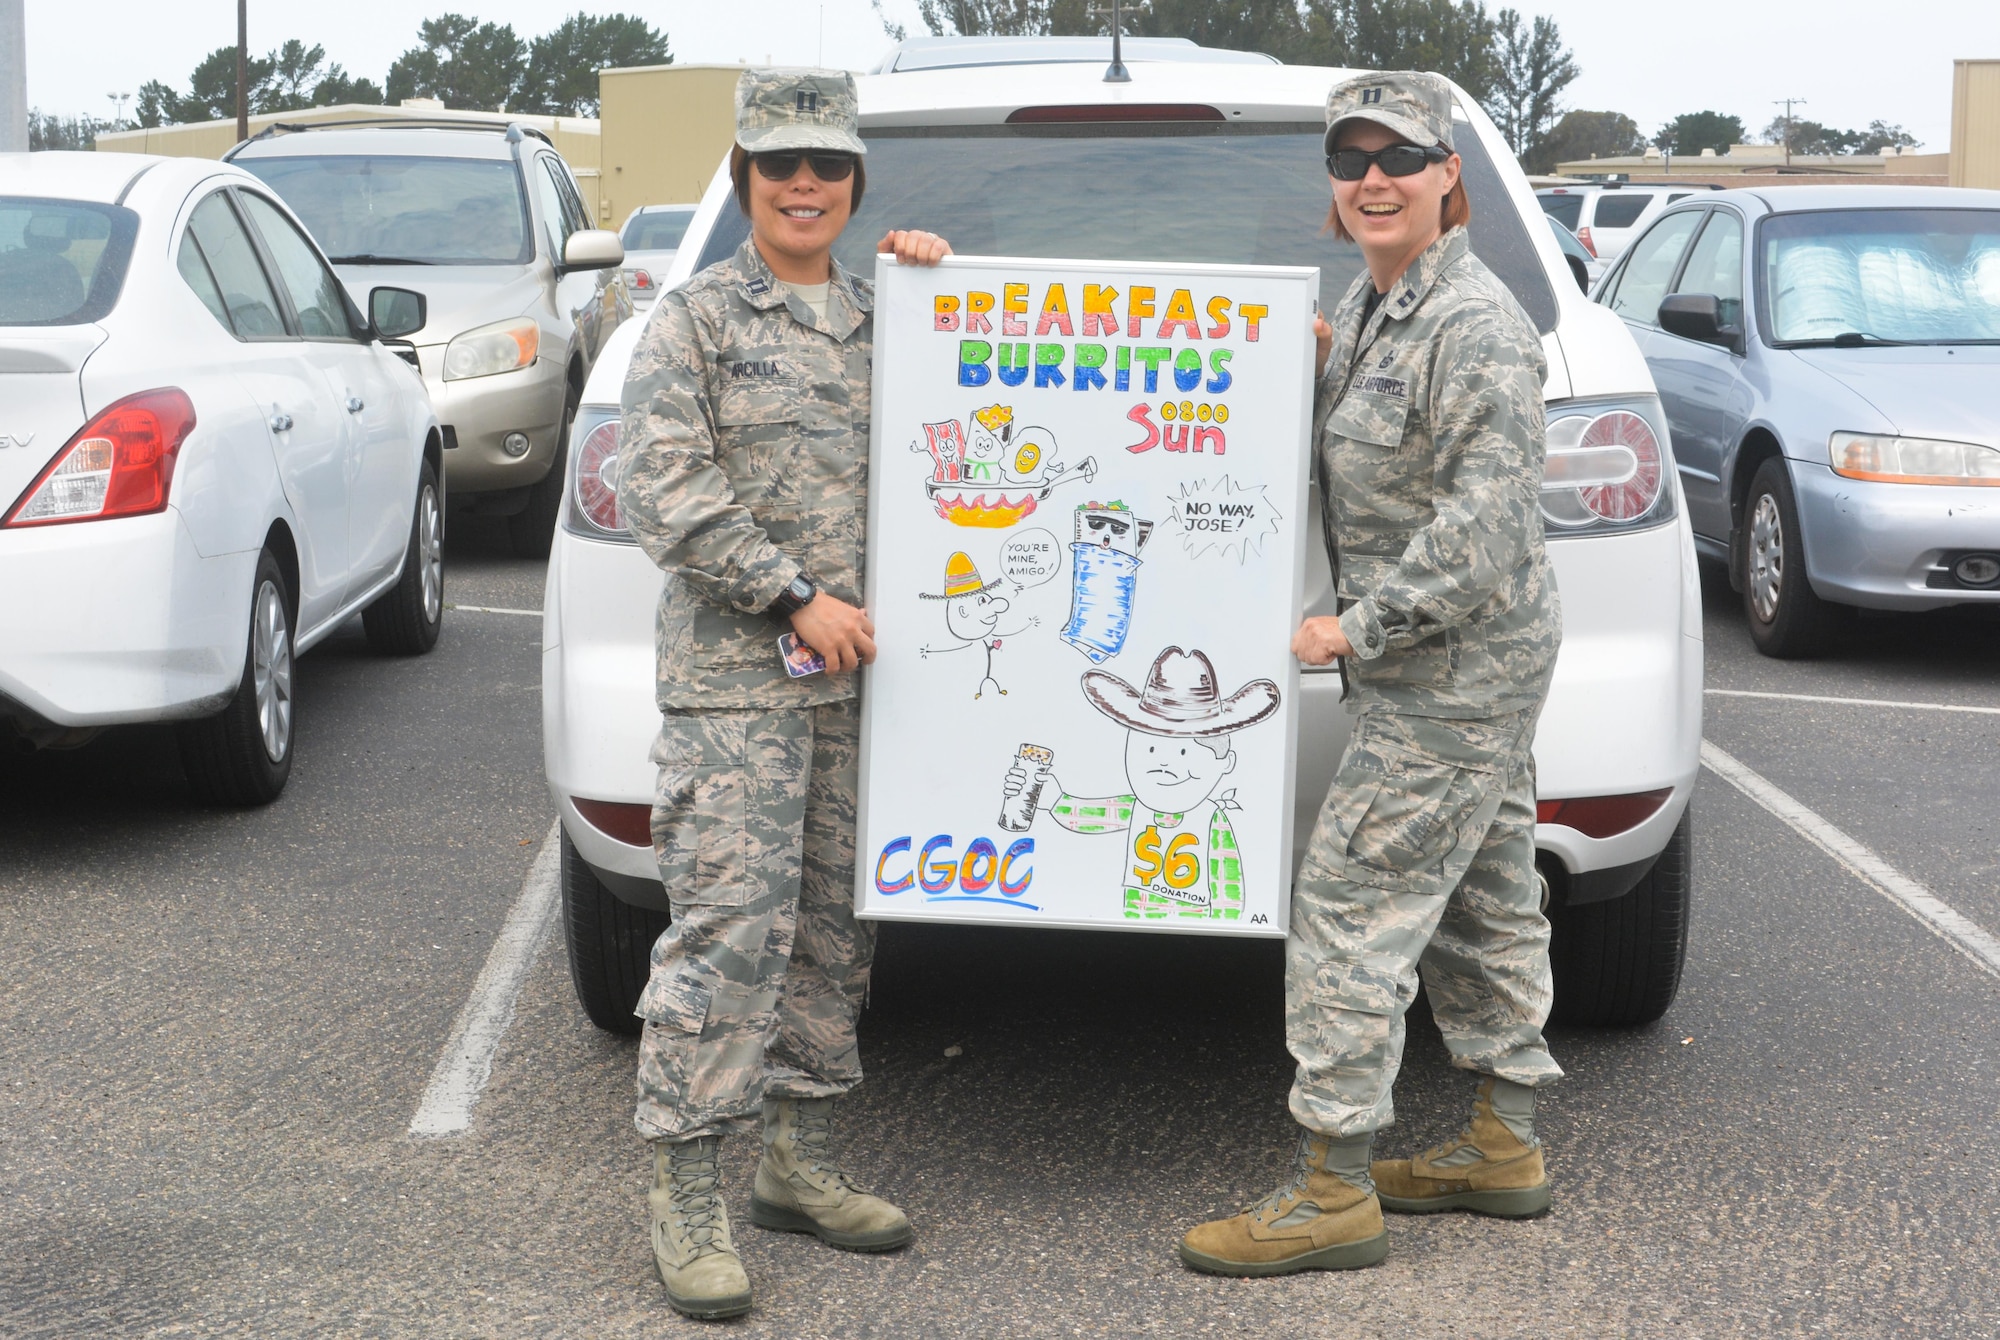 VANDENBERG AIR FORCE BASE, Cali. -- Members of the 9th Combat Operations Squadron, Capt. Aprille Arcilla and Capt. Laura Peyton, pose with a sign Arcilla created in support of their Company Grade Officers' Council on Sunday, July 9, 2017. Breakfast burritos were offered to Col. Traci Kueker-Murphy, 310th Space Wing commander, and Command Chief Master Sgt. Todd Scott while they were there visiting the unit. (U.S. Air Force photo/Senior Airman Laura Turner)